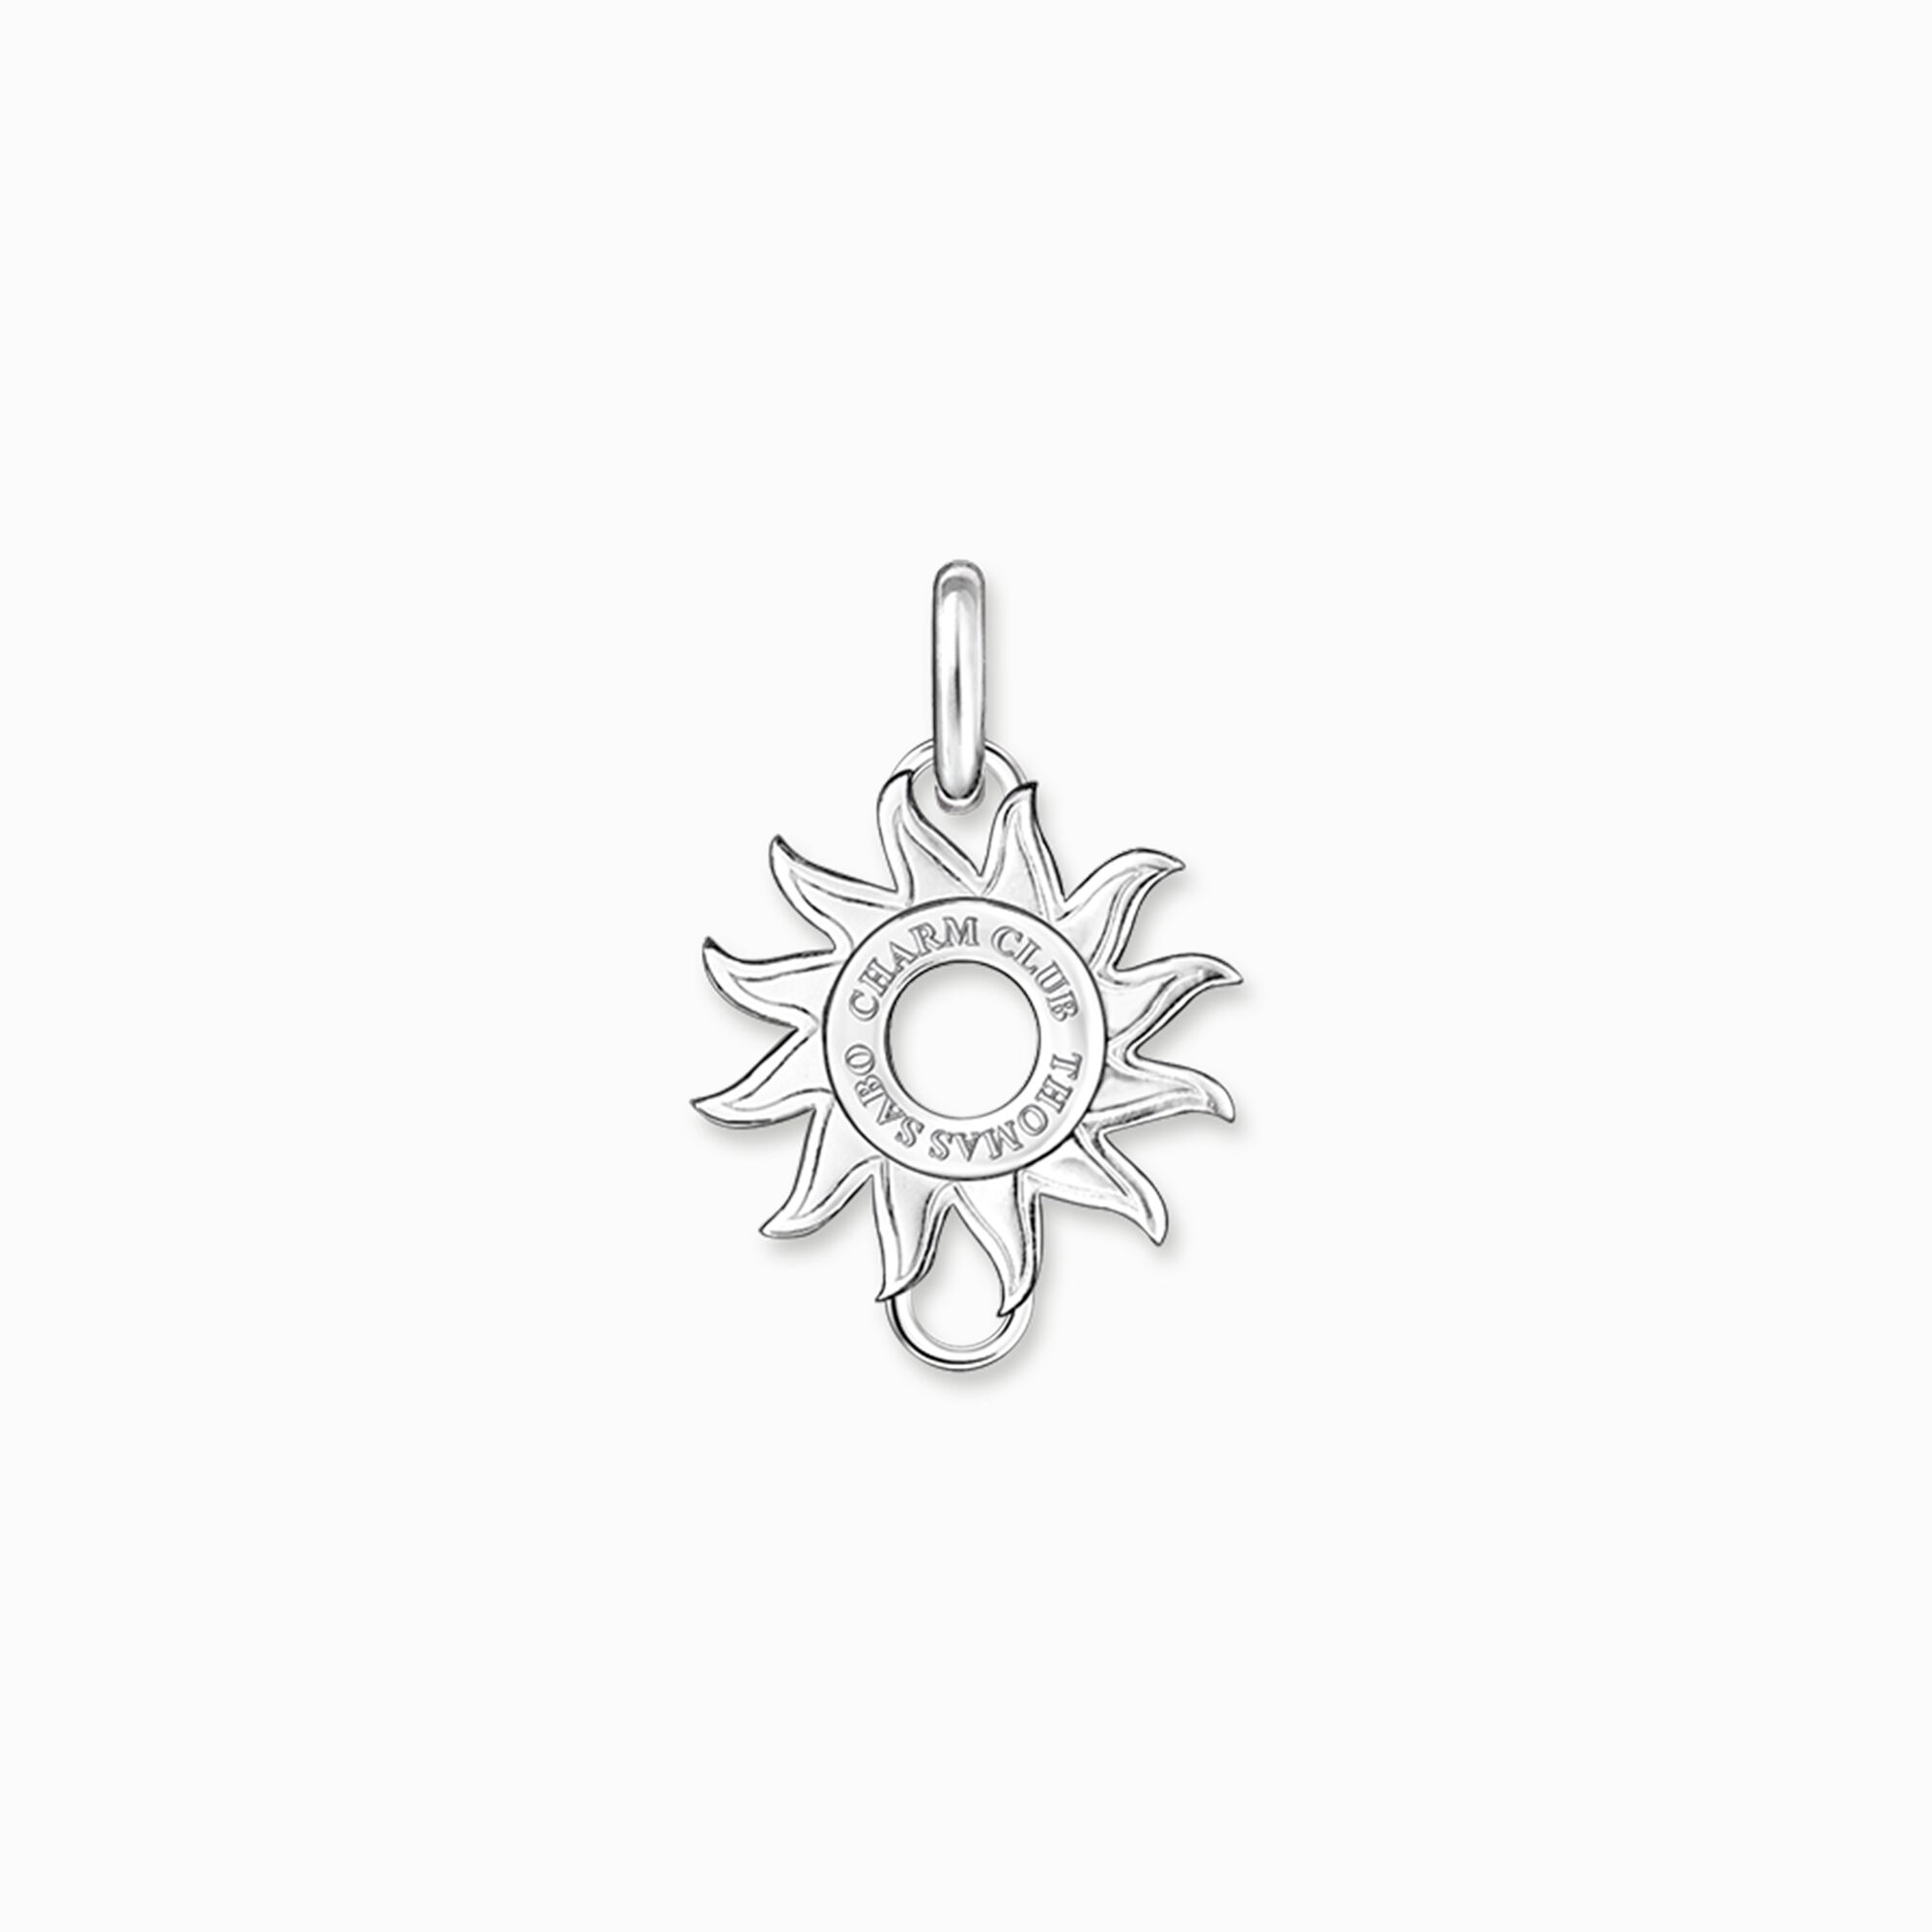 Carrier sun from the Charm Club collection in the THOMAS SABO online store